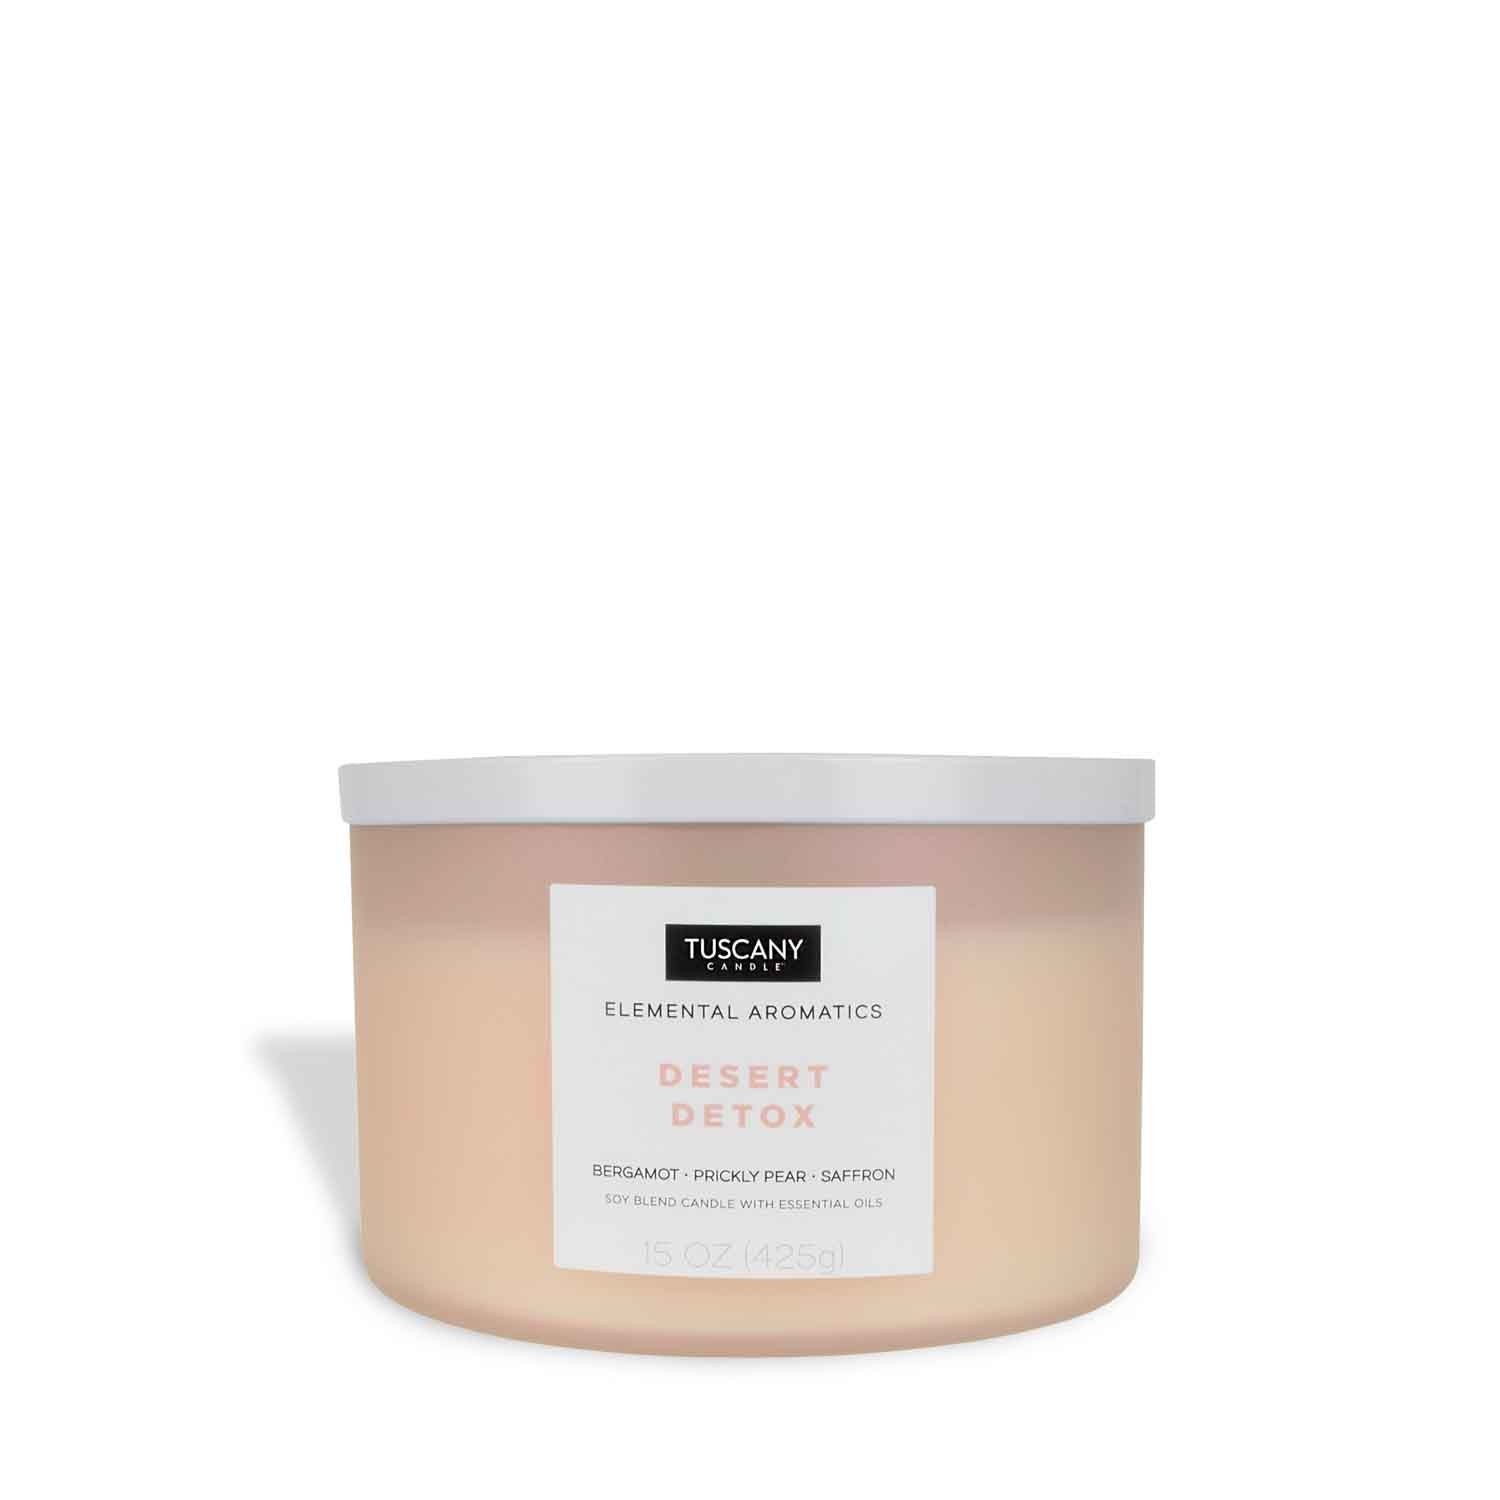 A Desert Detox scented-filled candle in a white jar with a pink lid, placed on a white background. (Brand: Tuscany Candle)